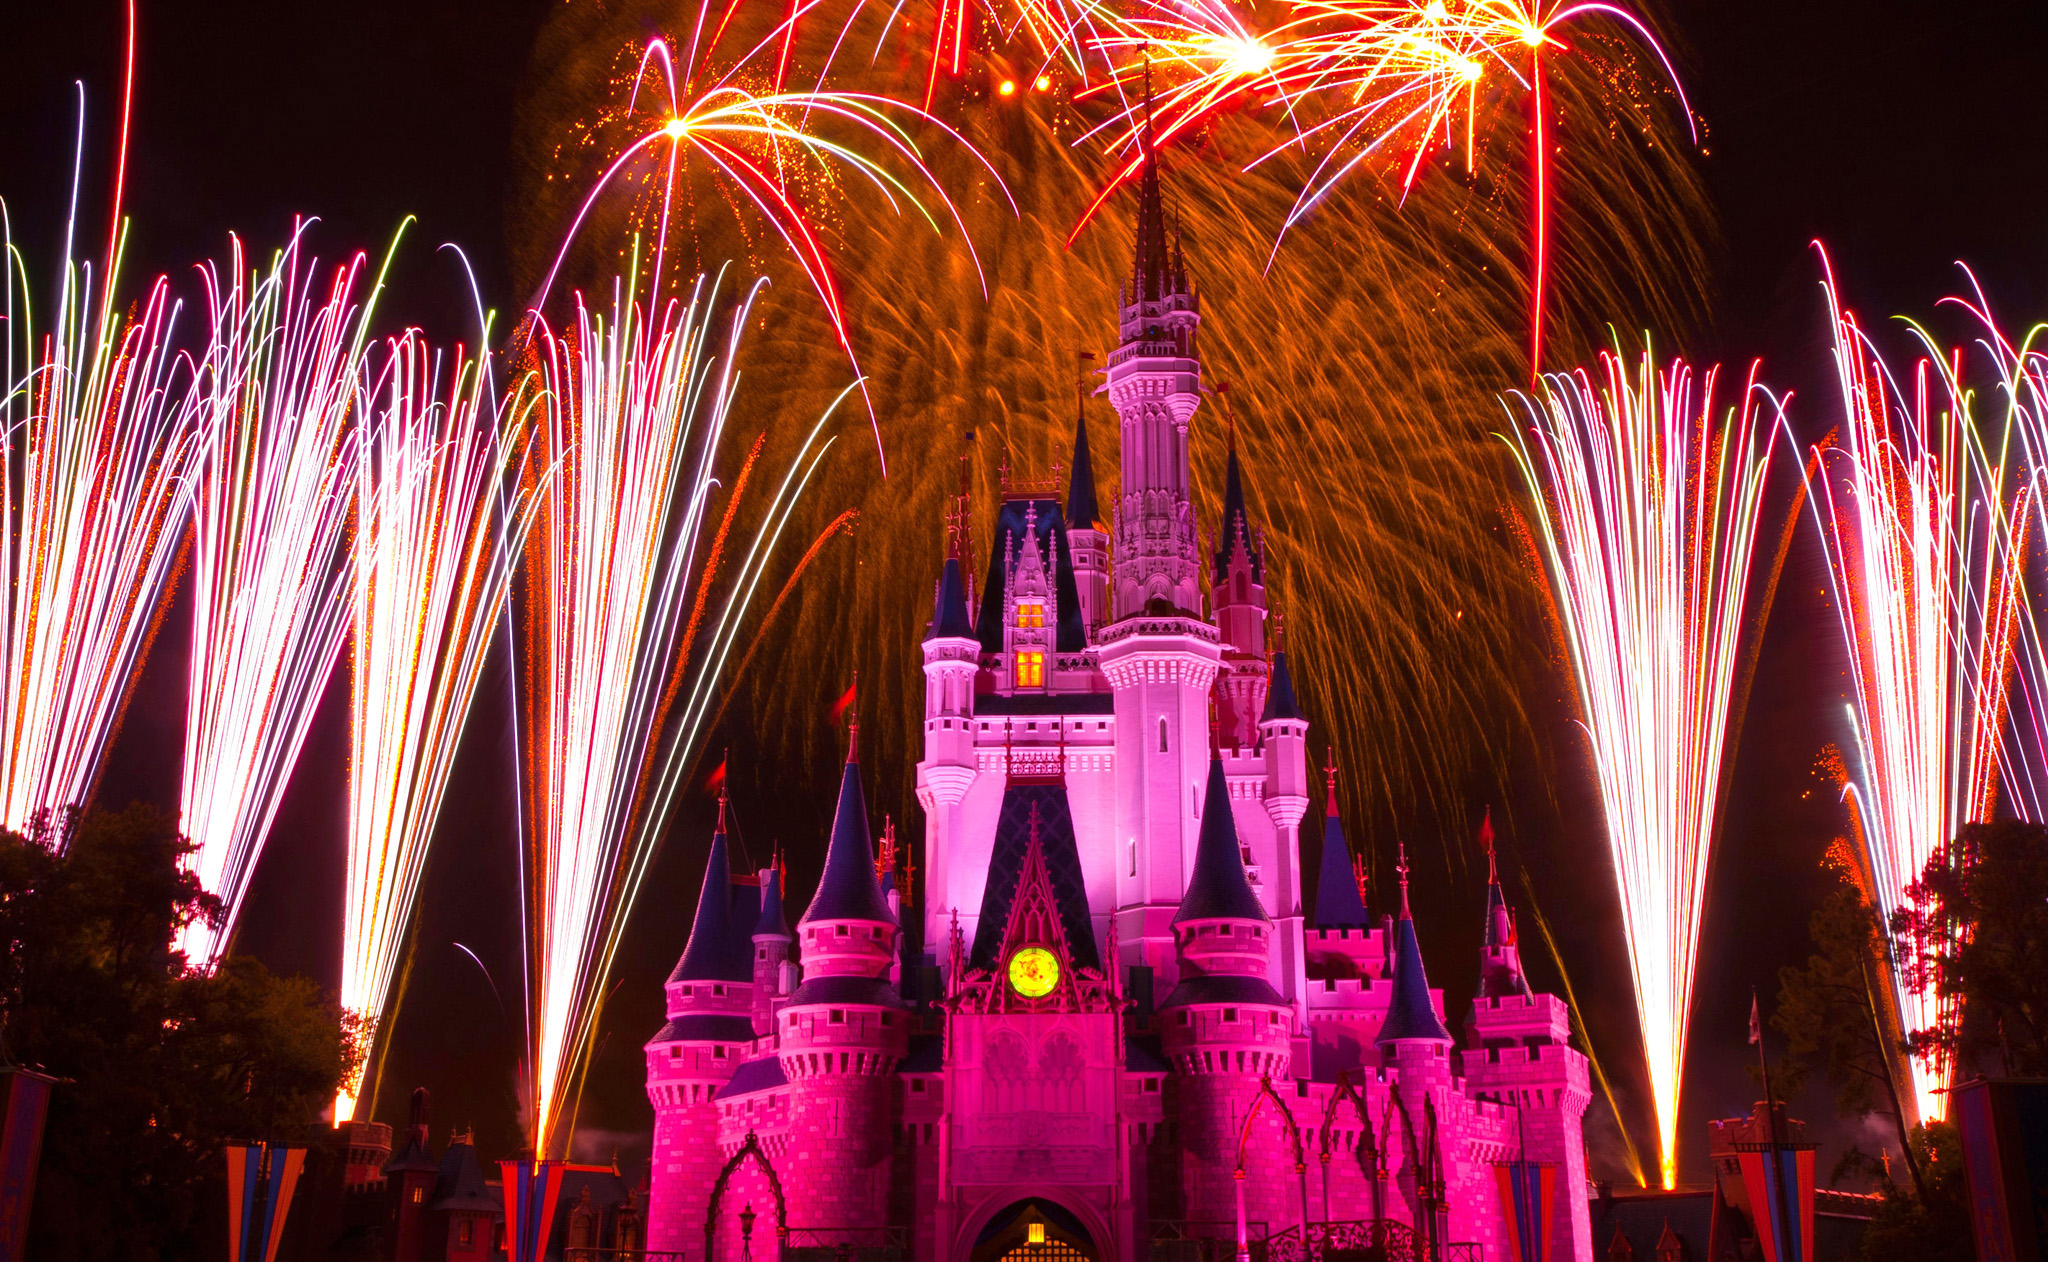 Fireworks light up the sky at Happily Ever After in the Magic Kingdom Day 2 - photo 5